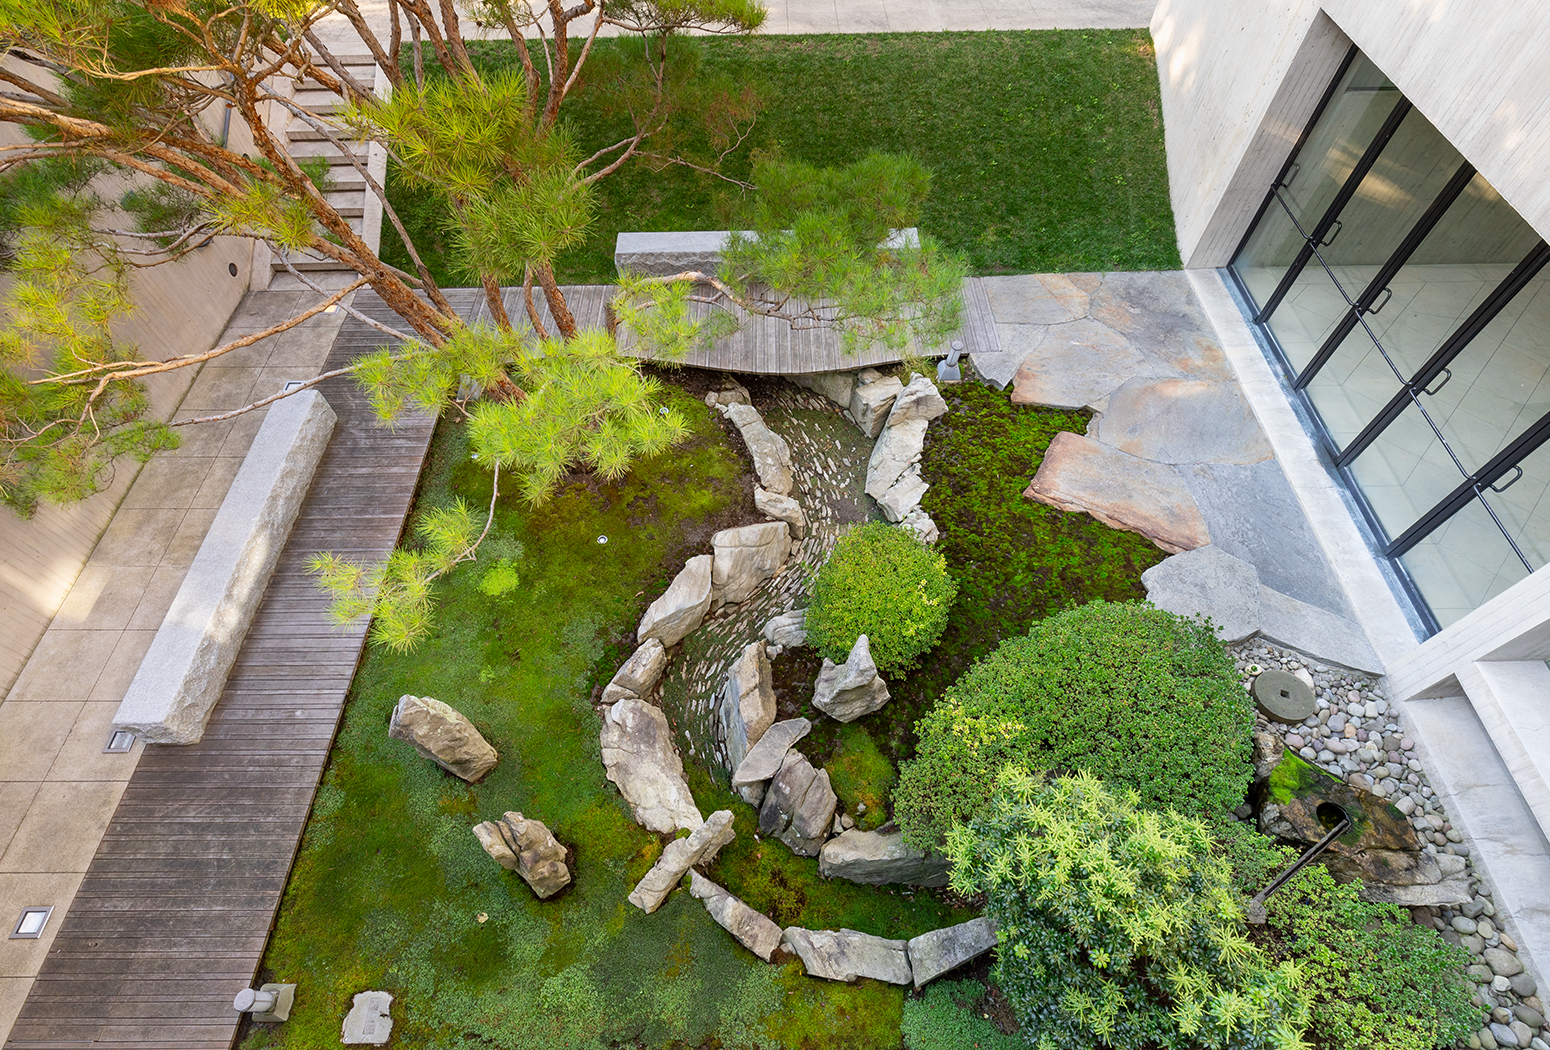 Looking down on a courtyard garden with rock formations and green trees, scrubs, moss.